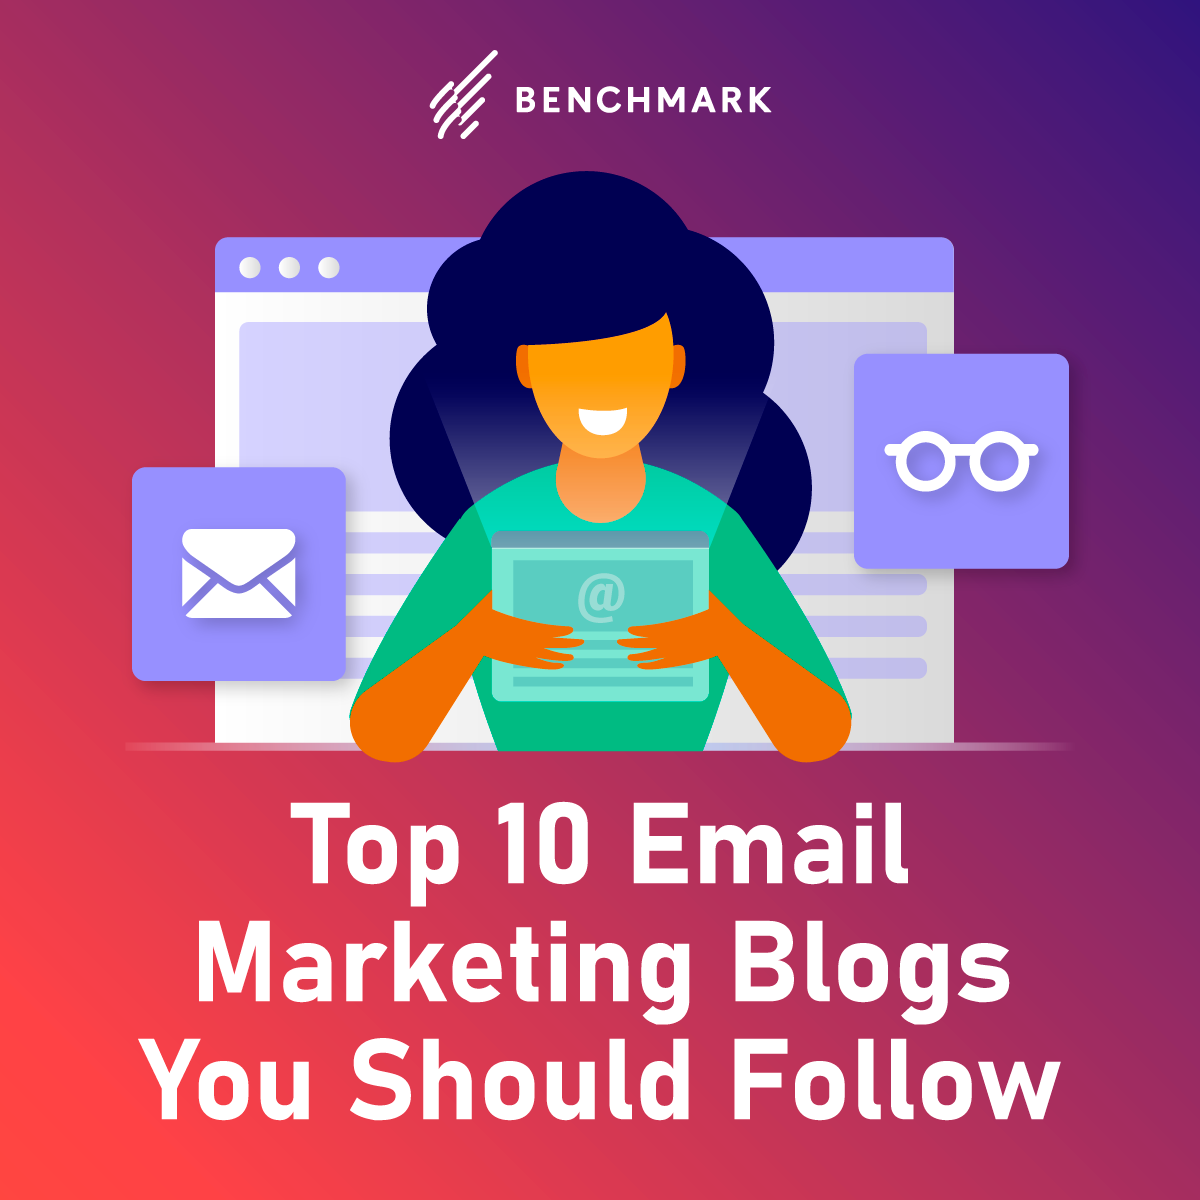 Top 10 Email Marketing Blogs You Should Follow